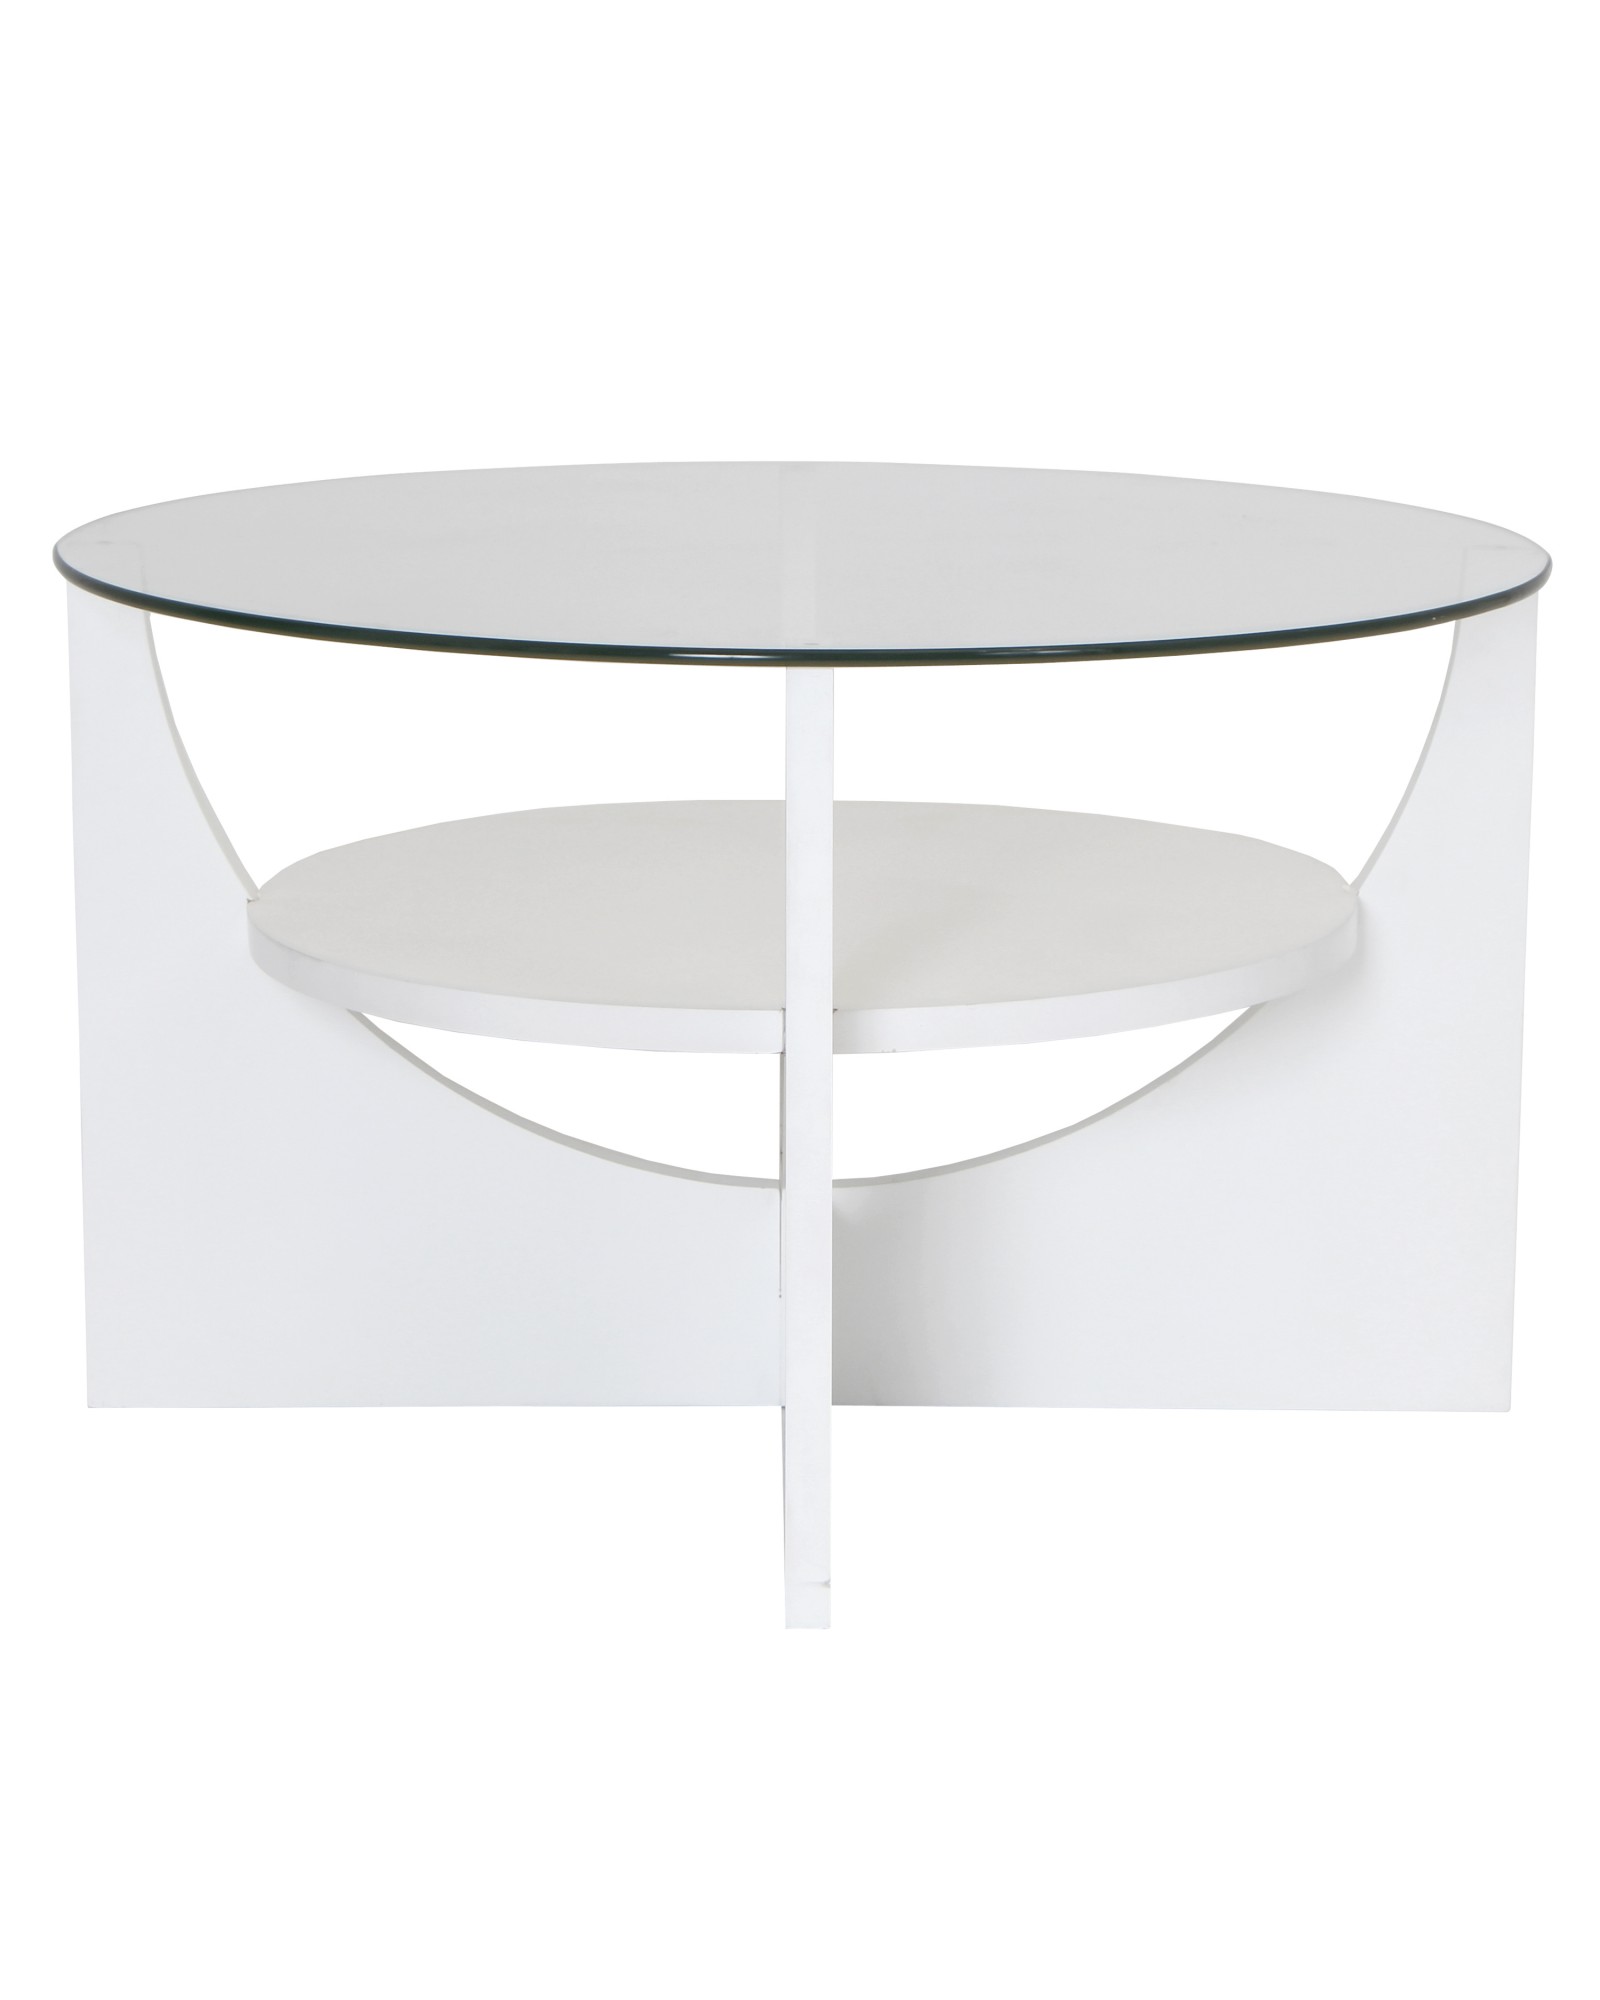 U Shaped Contemporary Coffee Table in White